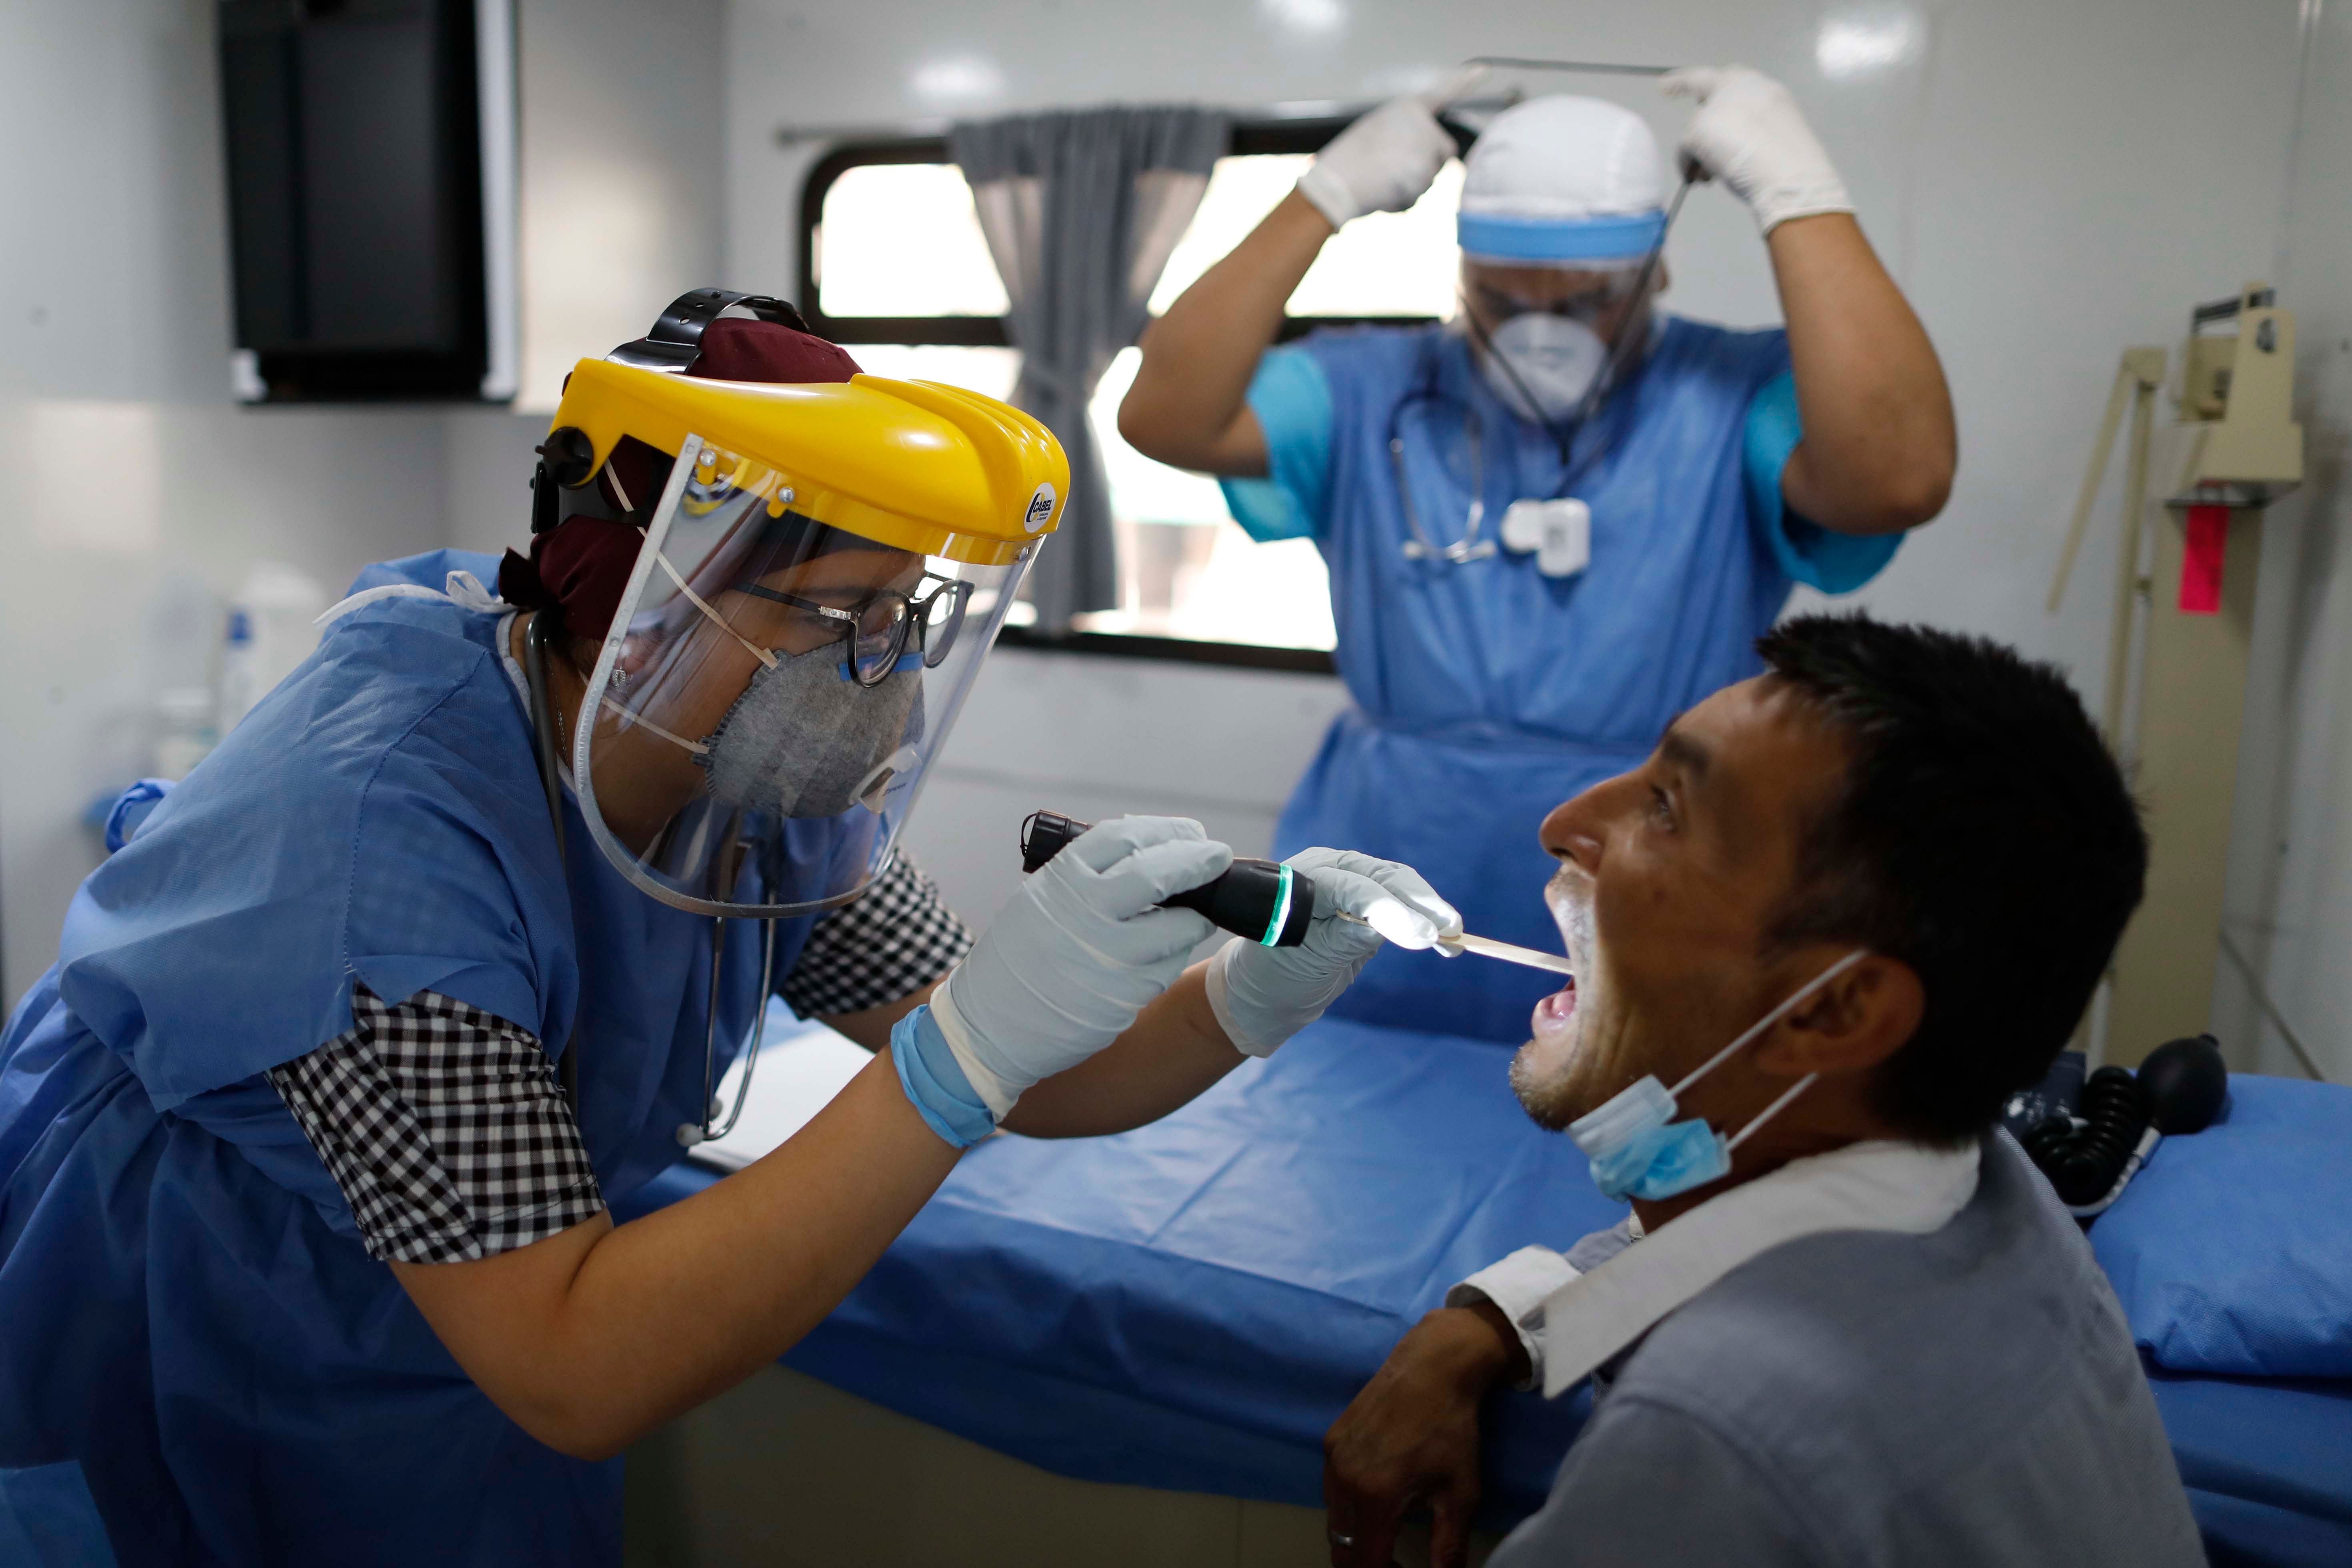 Of the 1,502,478 infections, 87,320 people have died across 192 countries and territories since the epidemic first emerged in China late last year. (Credit: AP Photo)